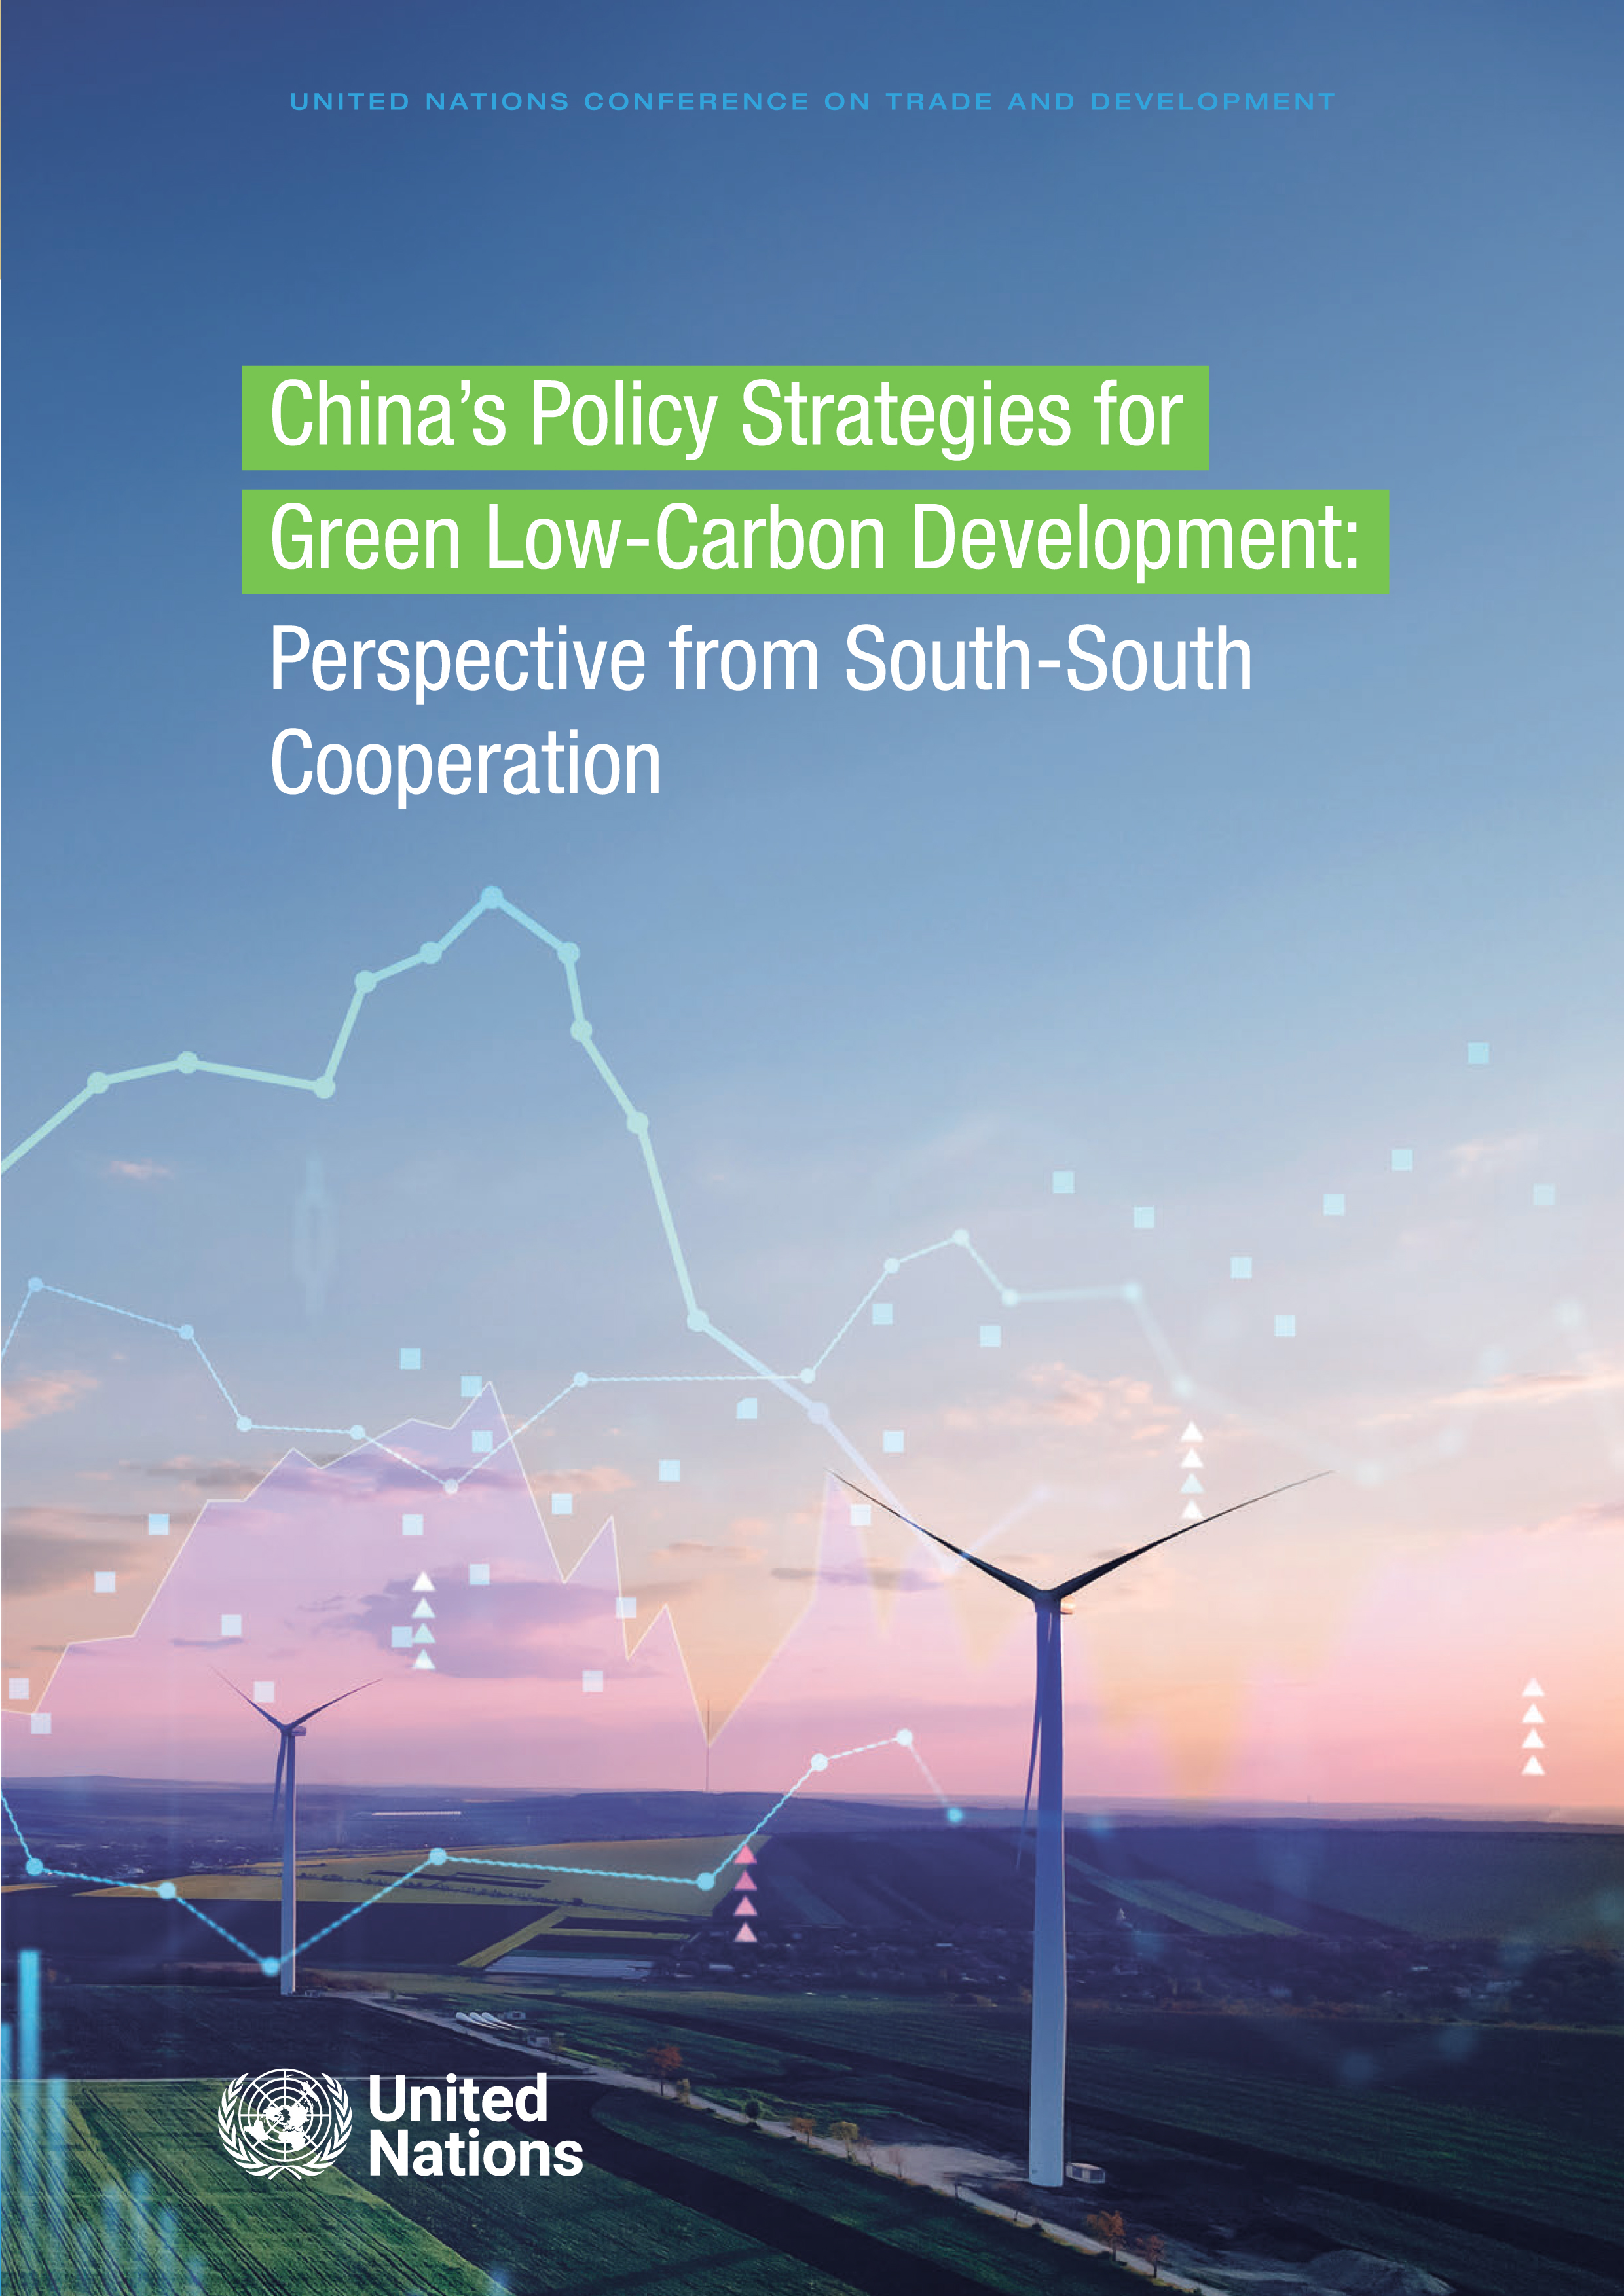 image of China’s Policy Strategies for Green Low-Carbon Development: Perspective from South-South Cooperation